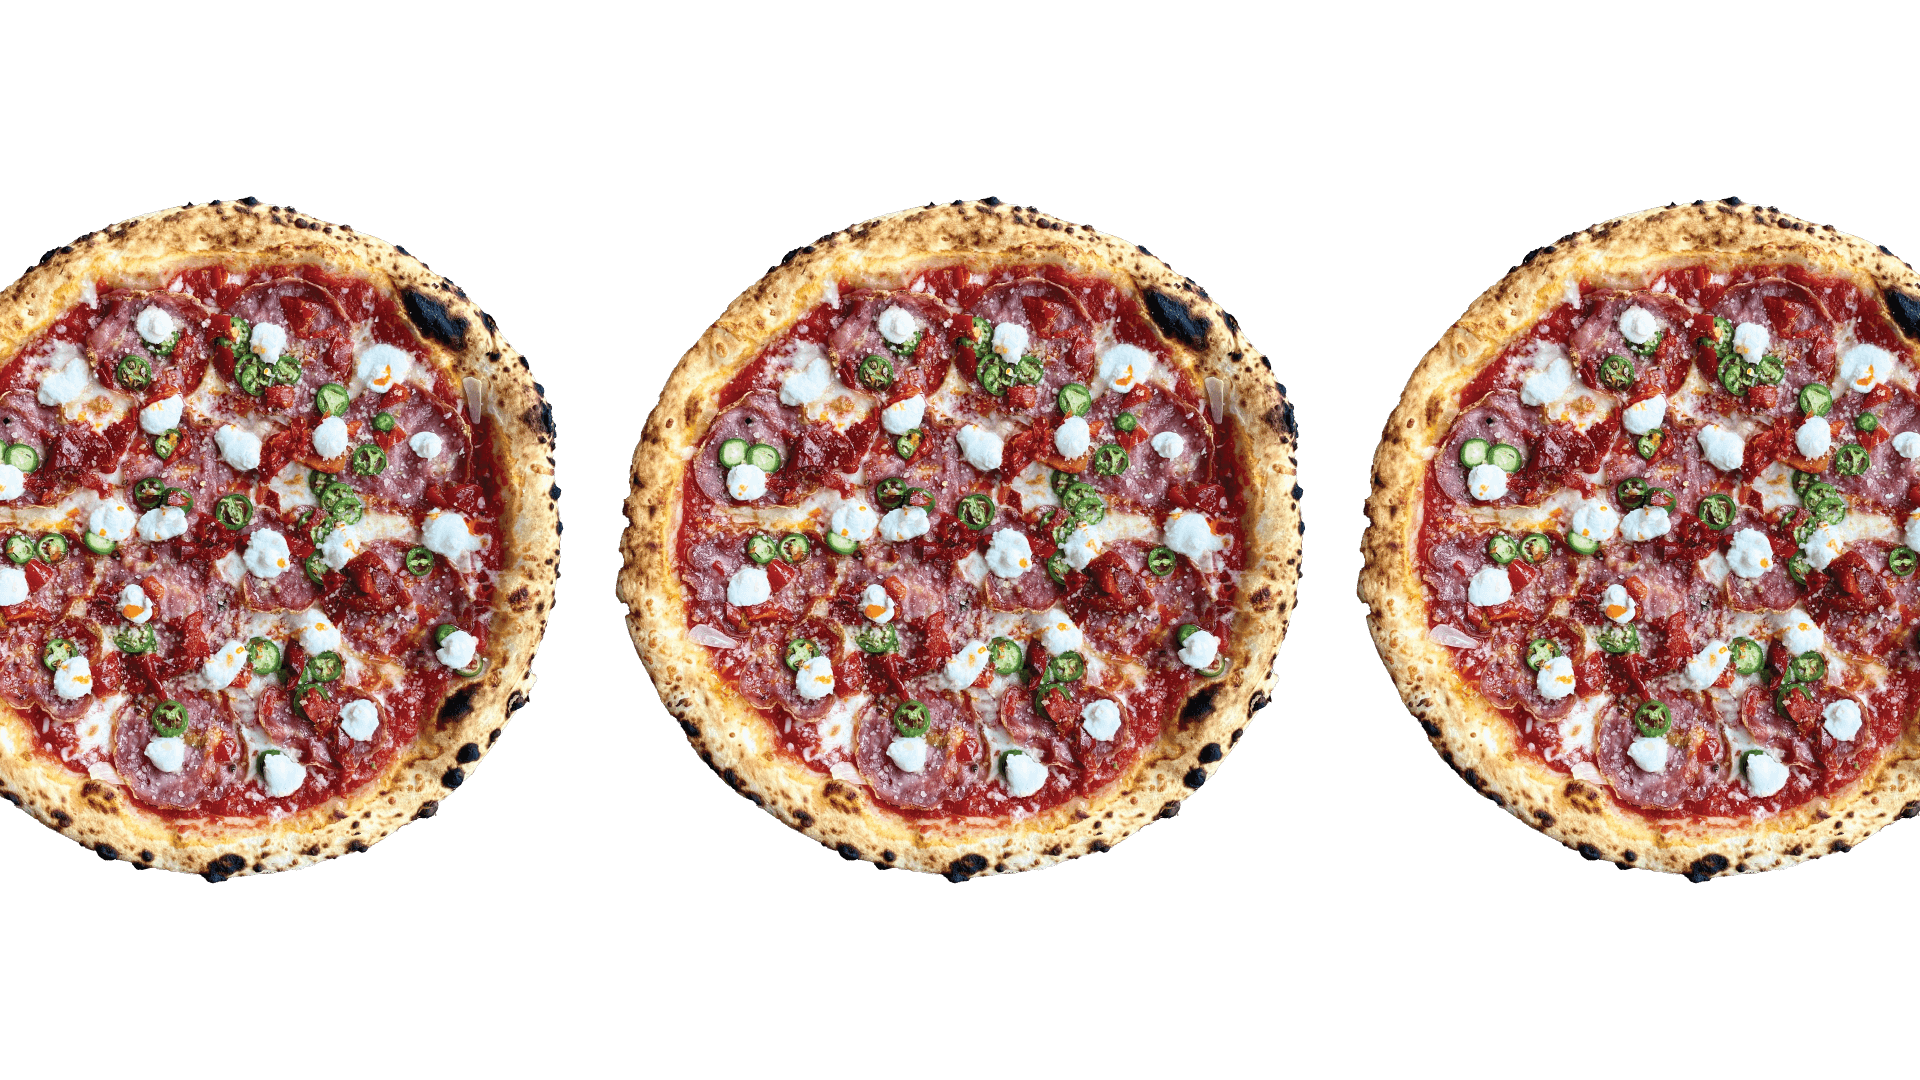 Extra Thin Crust Pizzas by The Masonry Seattle